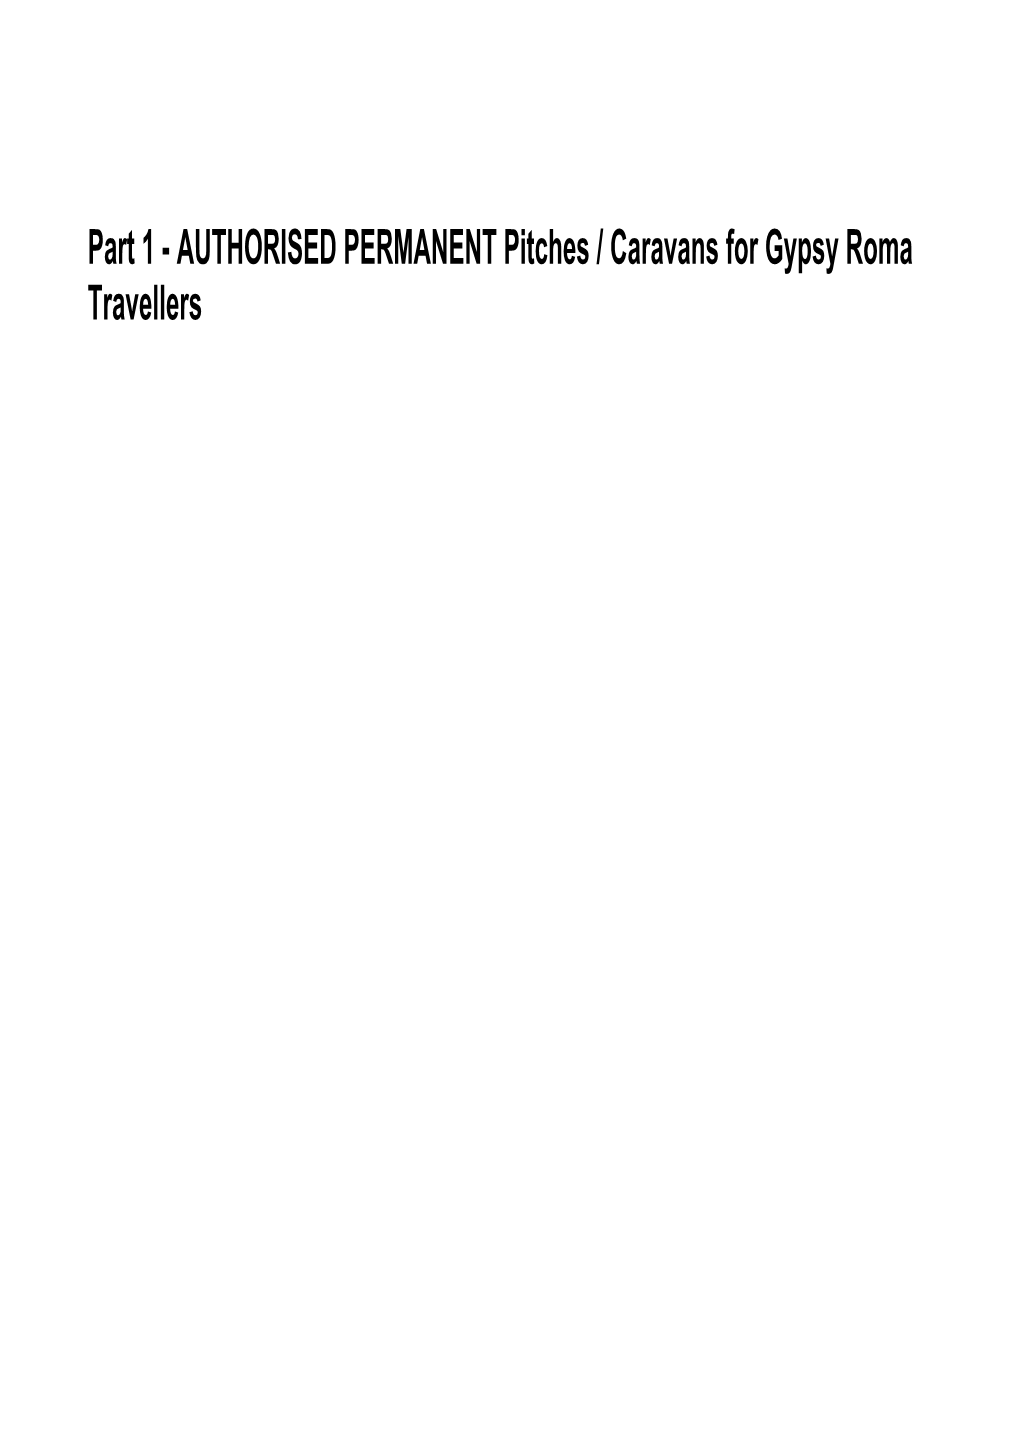 AUTHORISED PERMANENT Pitches / Caravans for Gypsy Roma Travellers